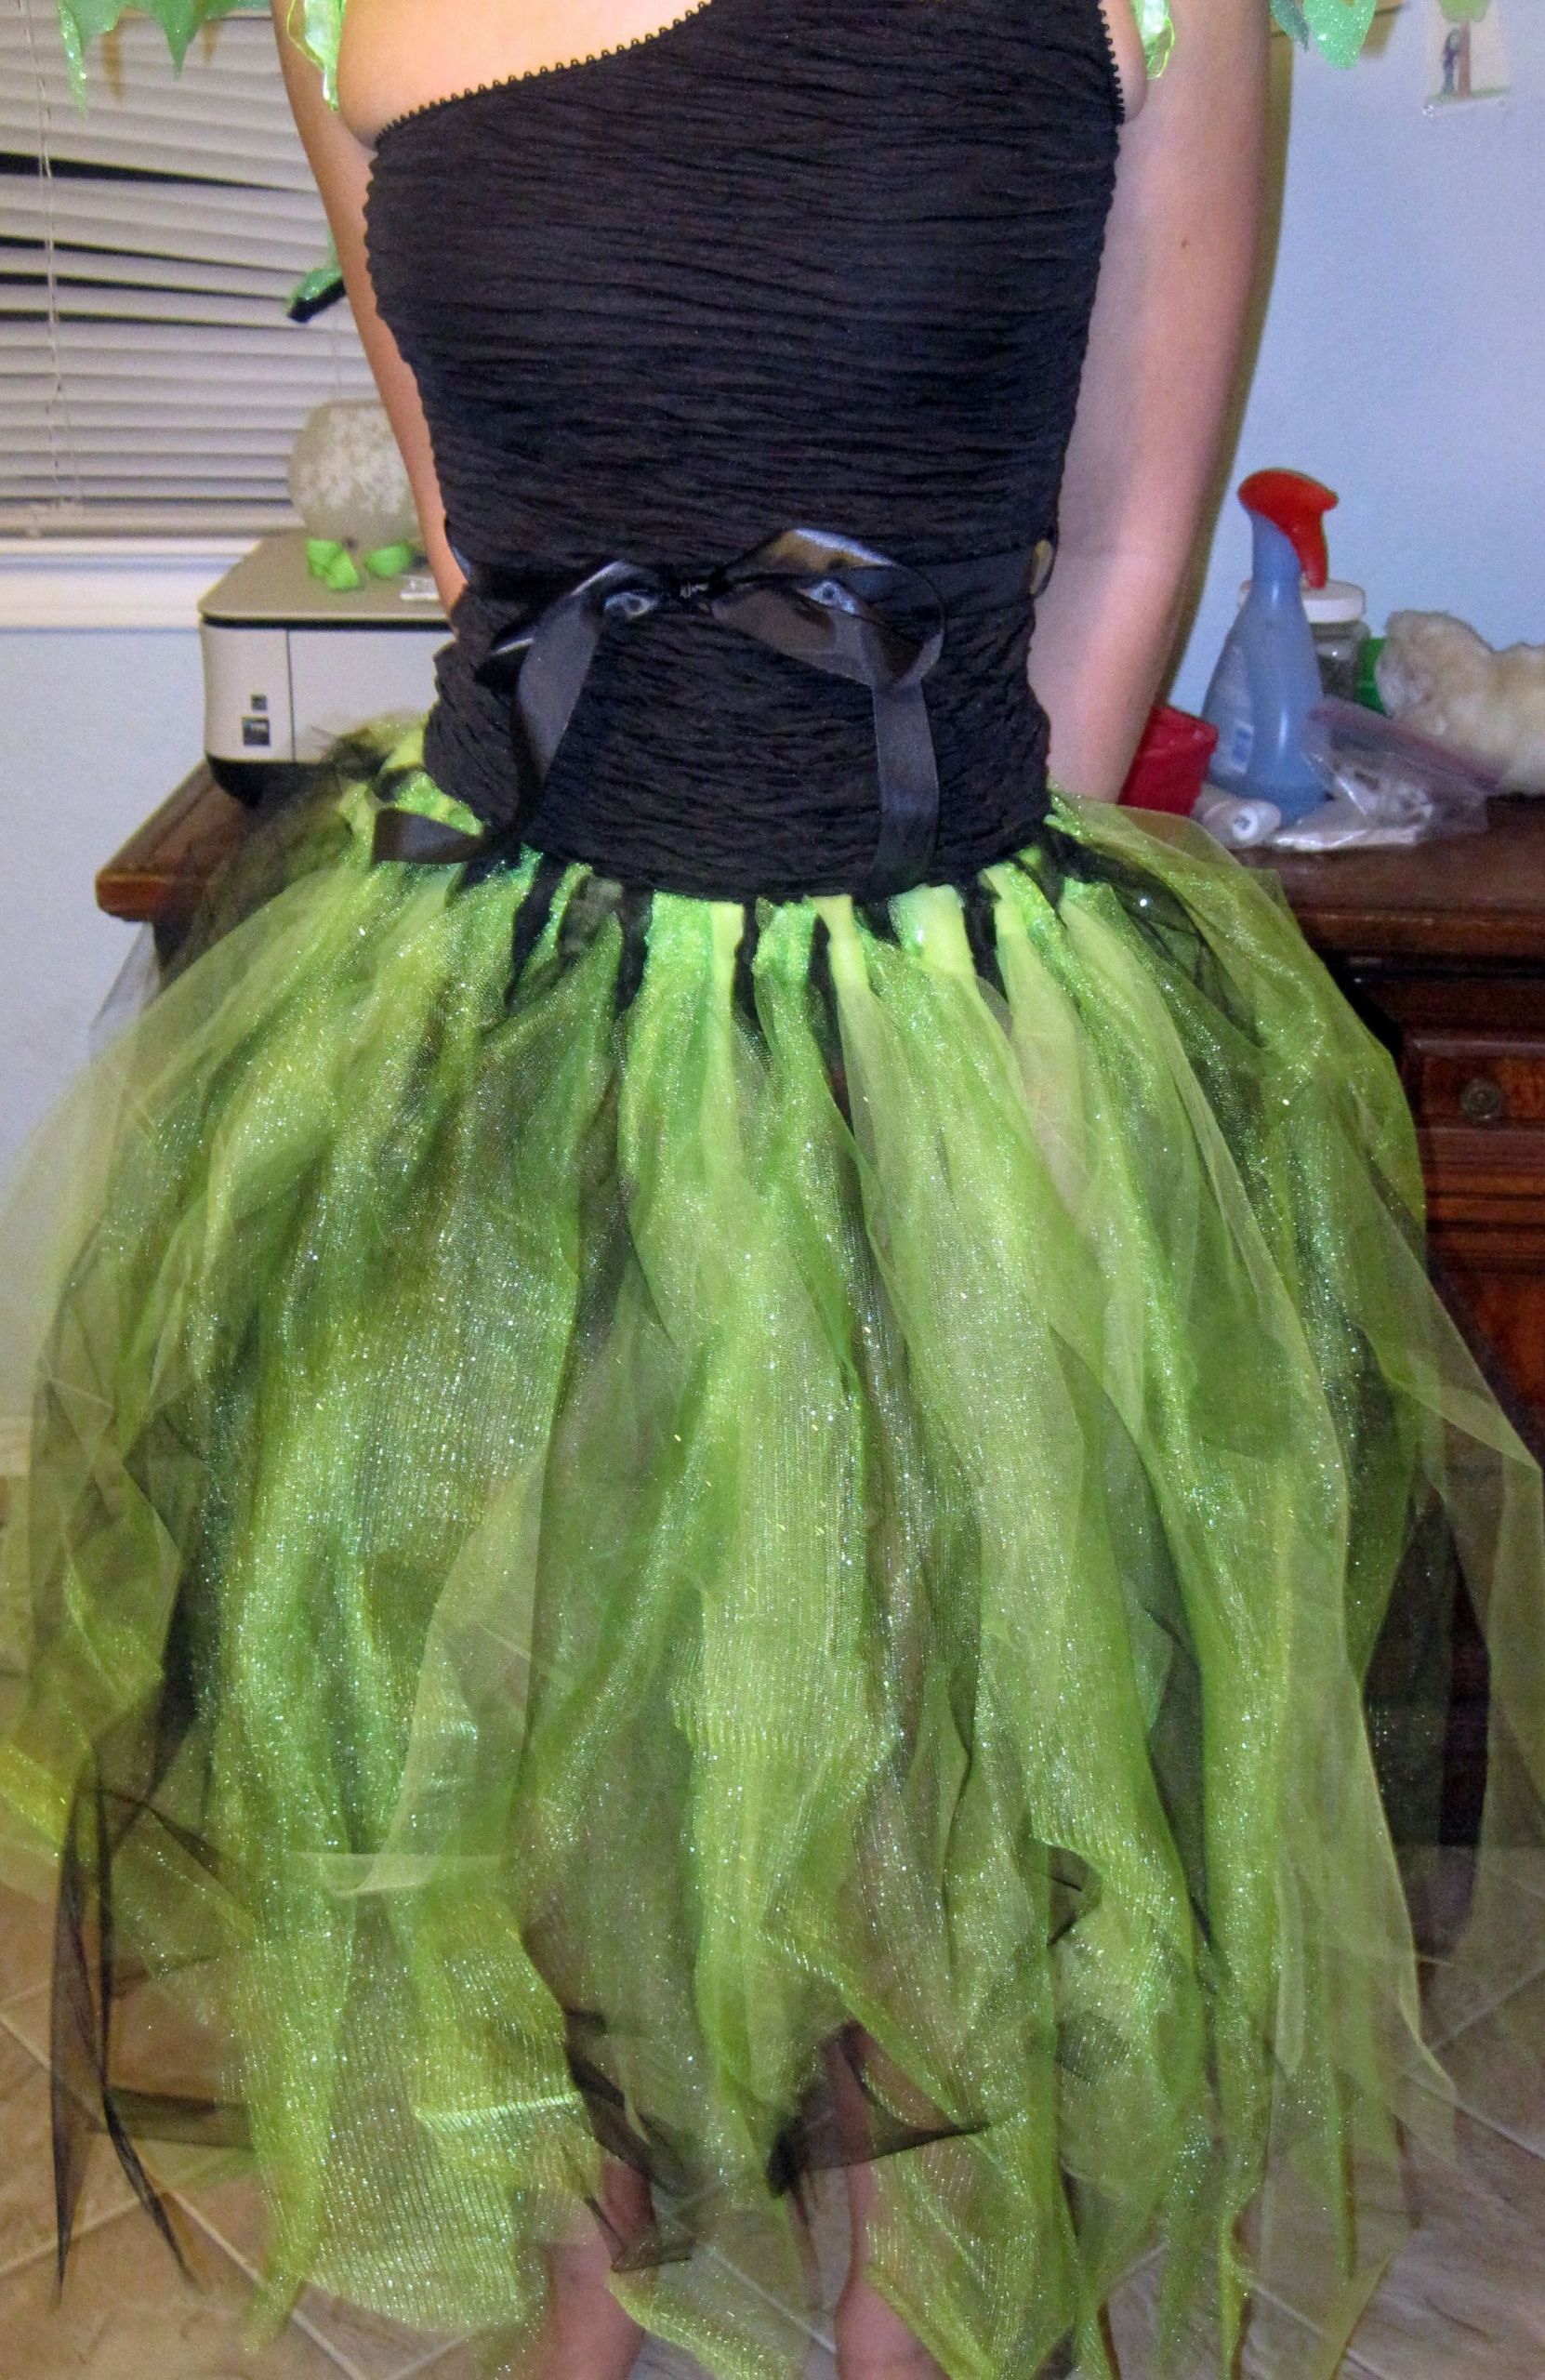 Tutu Skirt For Adults DIY
 Our DIY Tutu skirt for my daughter s fairy costume